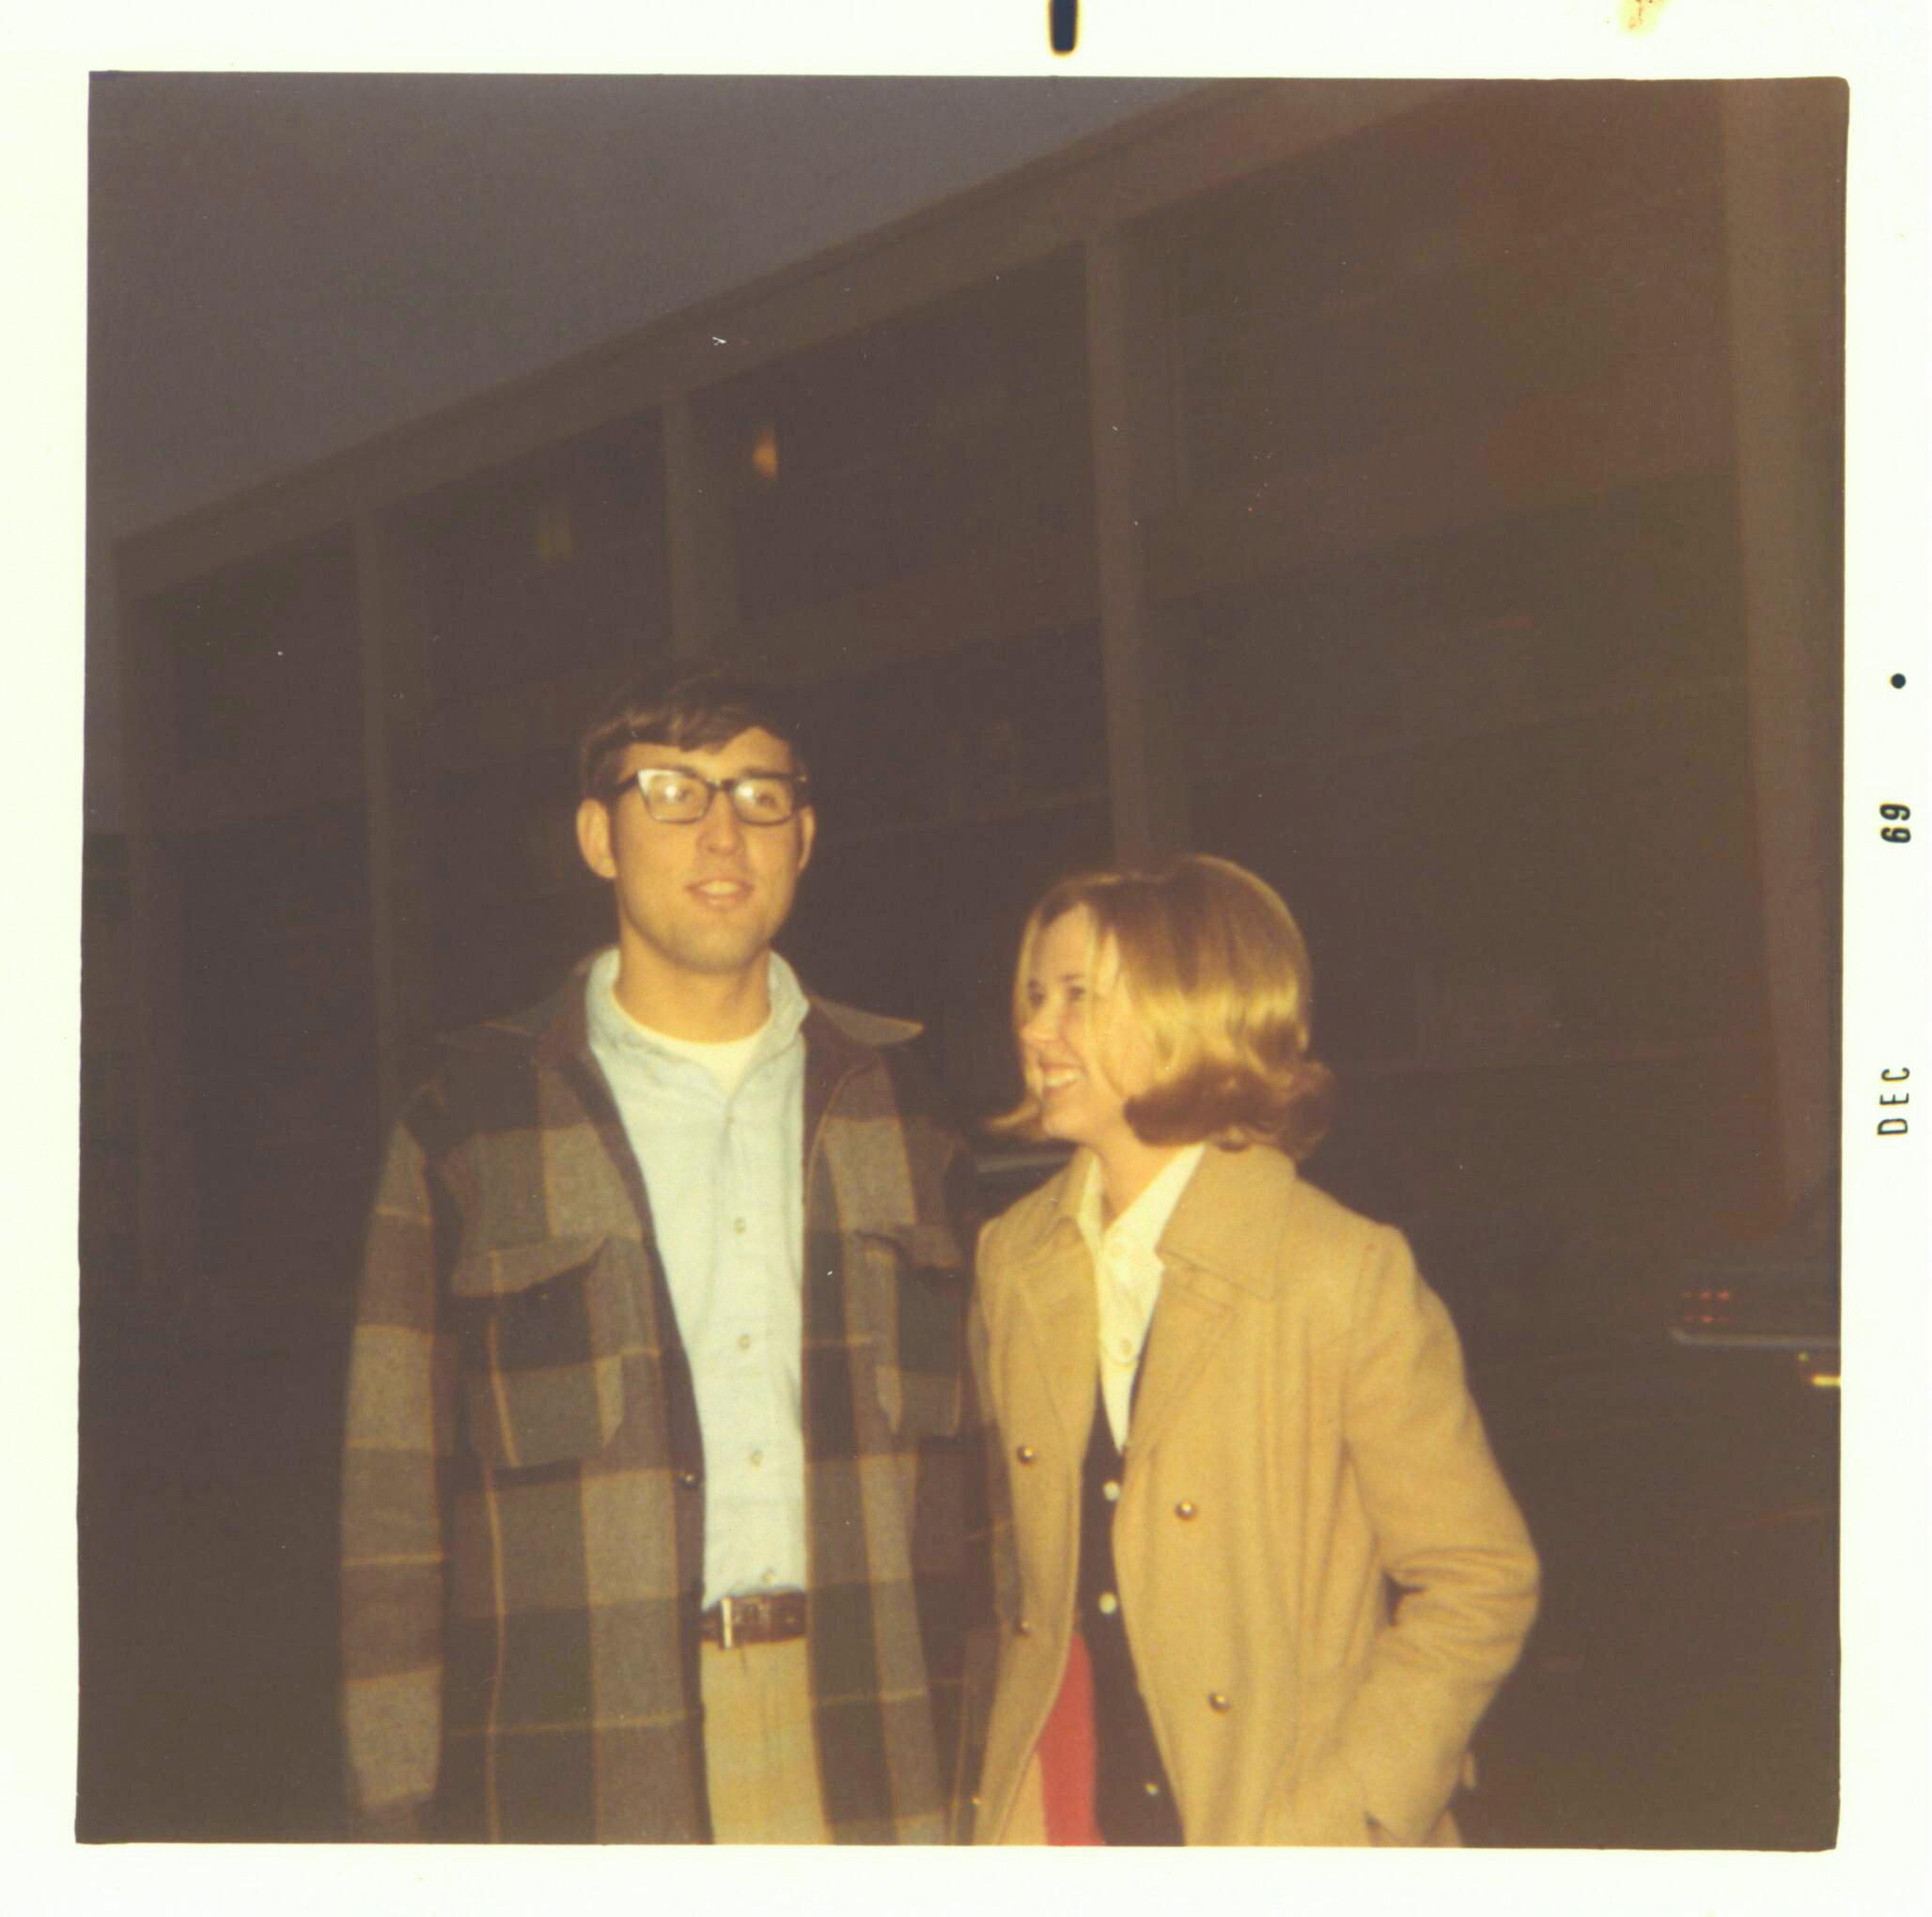 Gerald and Susie, 1970